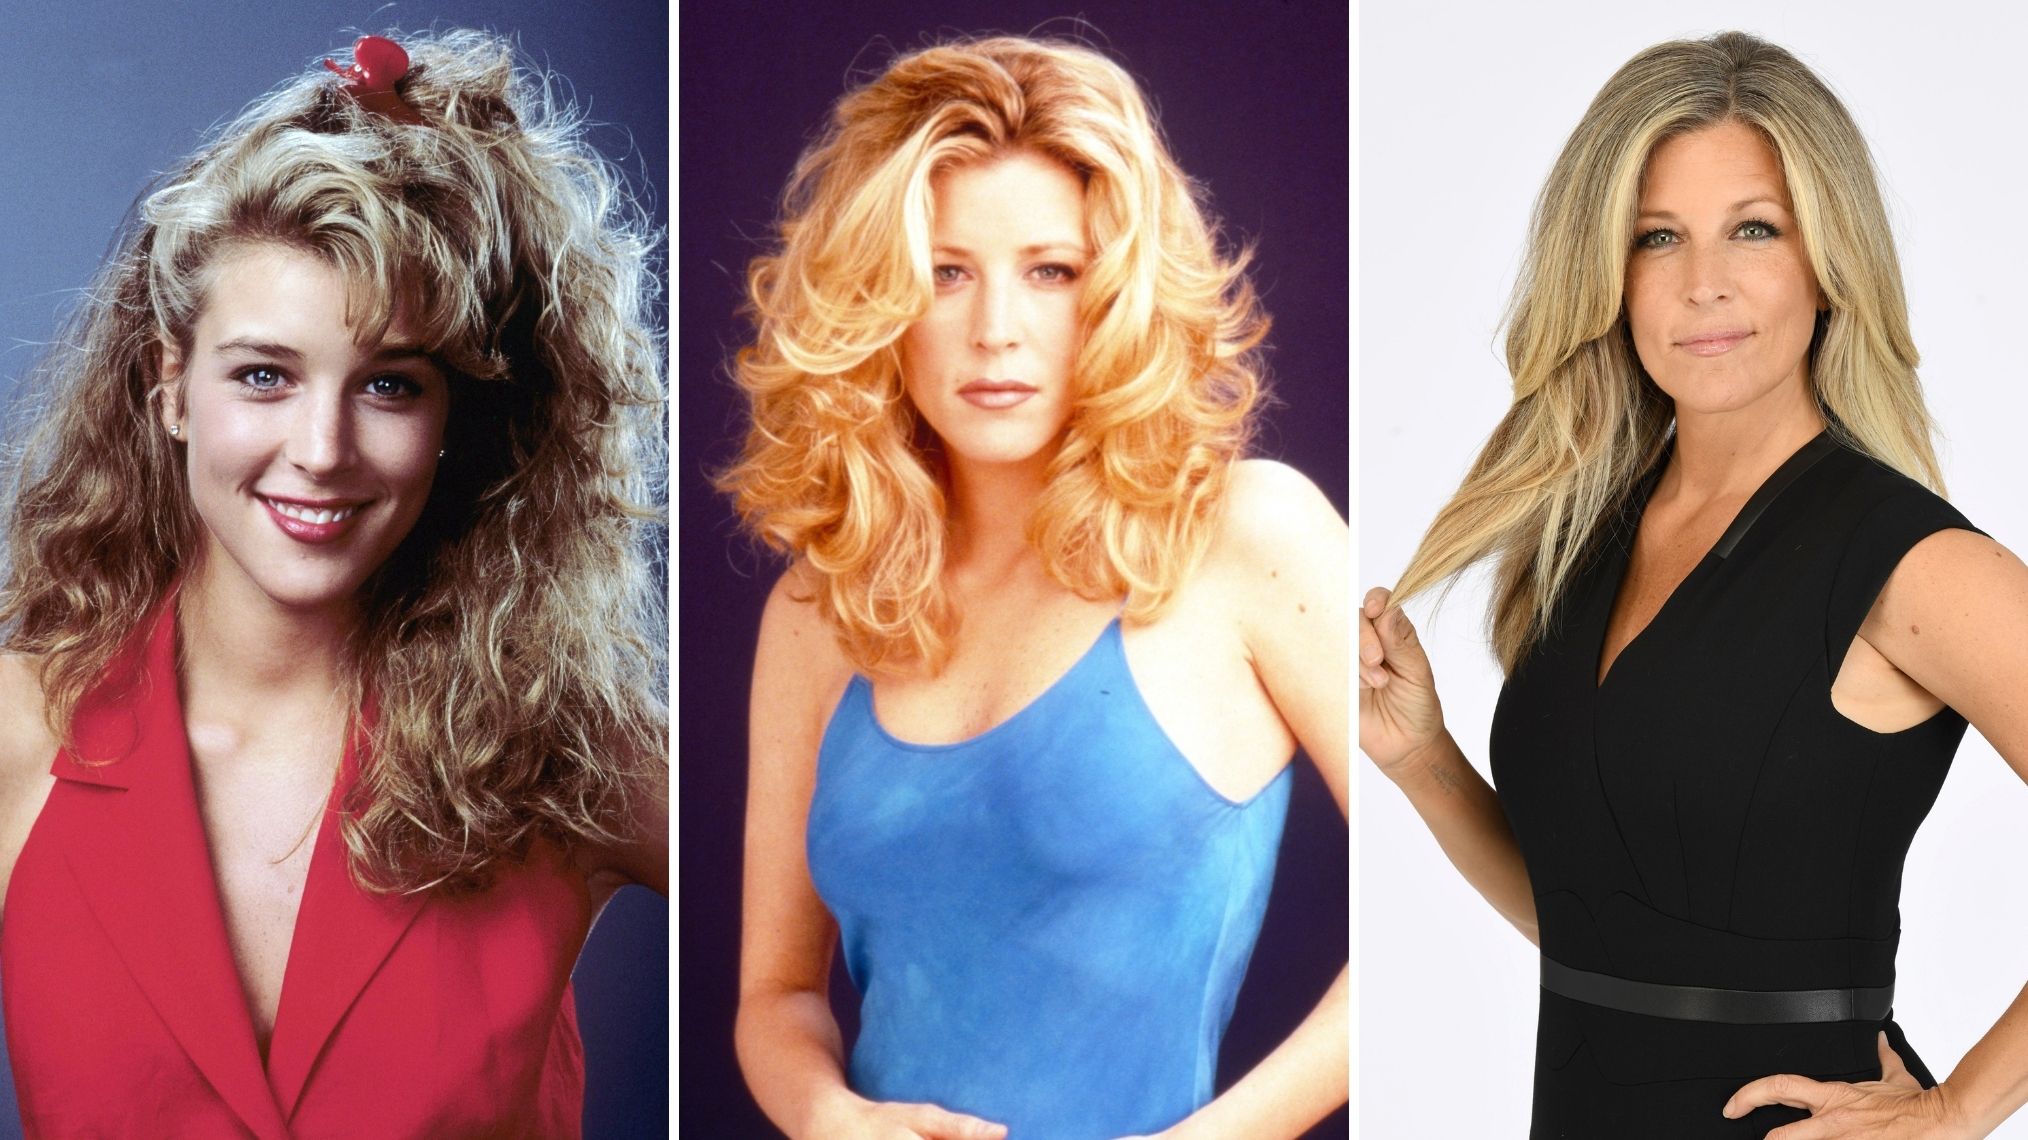 general hospital star laura wright looks back at 30 years in daytime